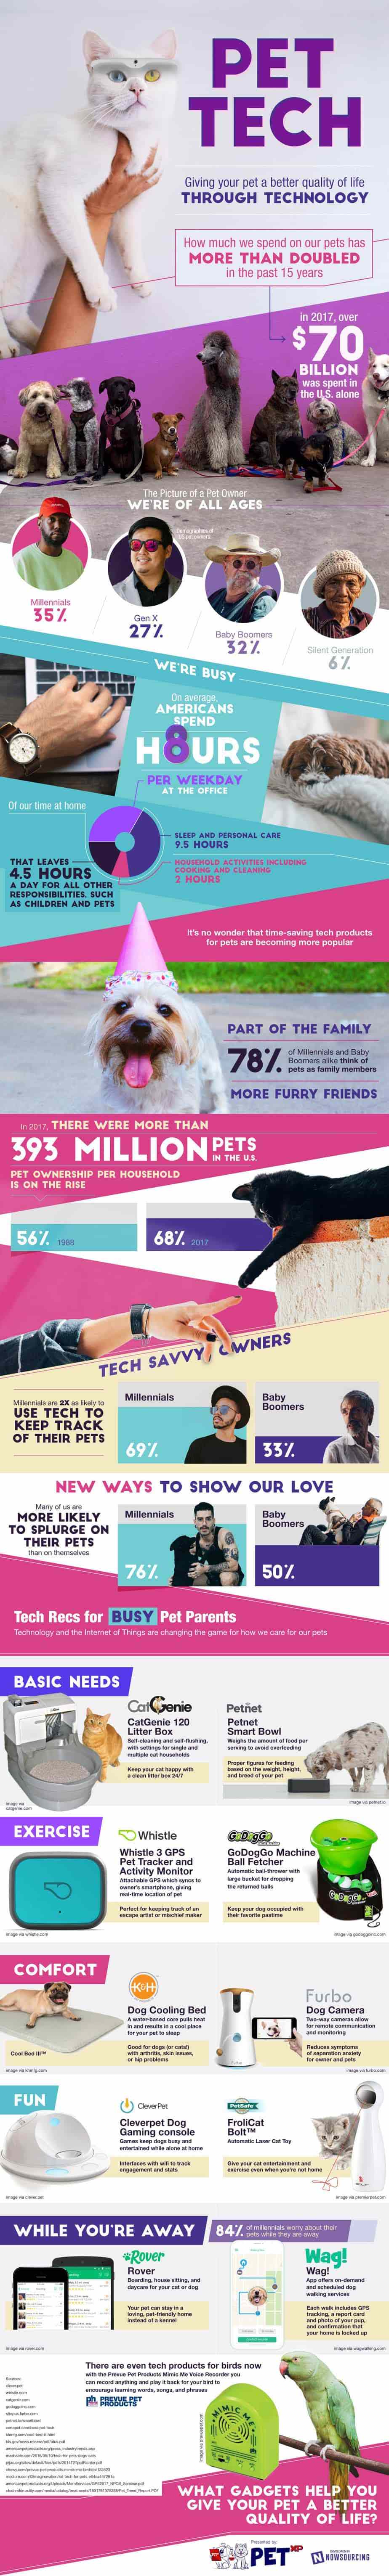 Pet Technology Can Give Your Pal a Better Life #infographic